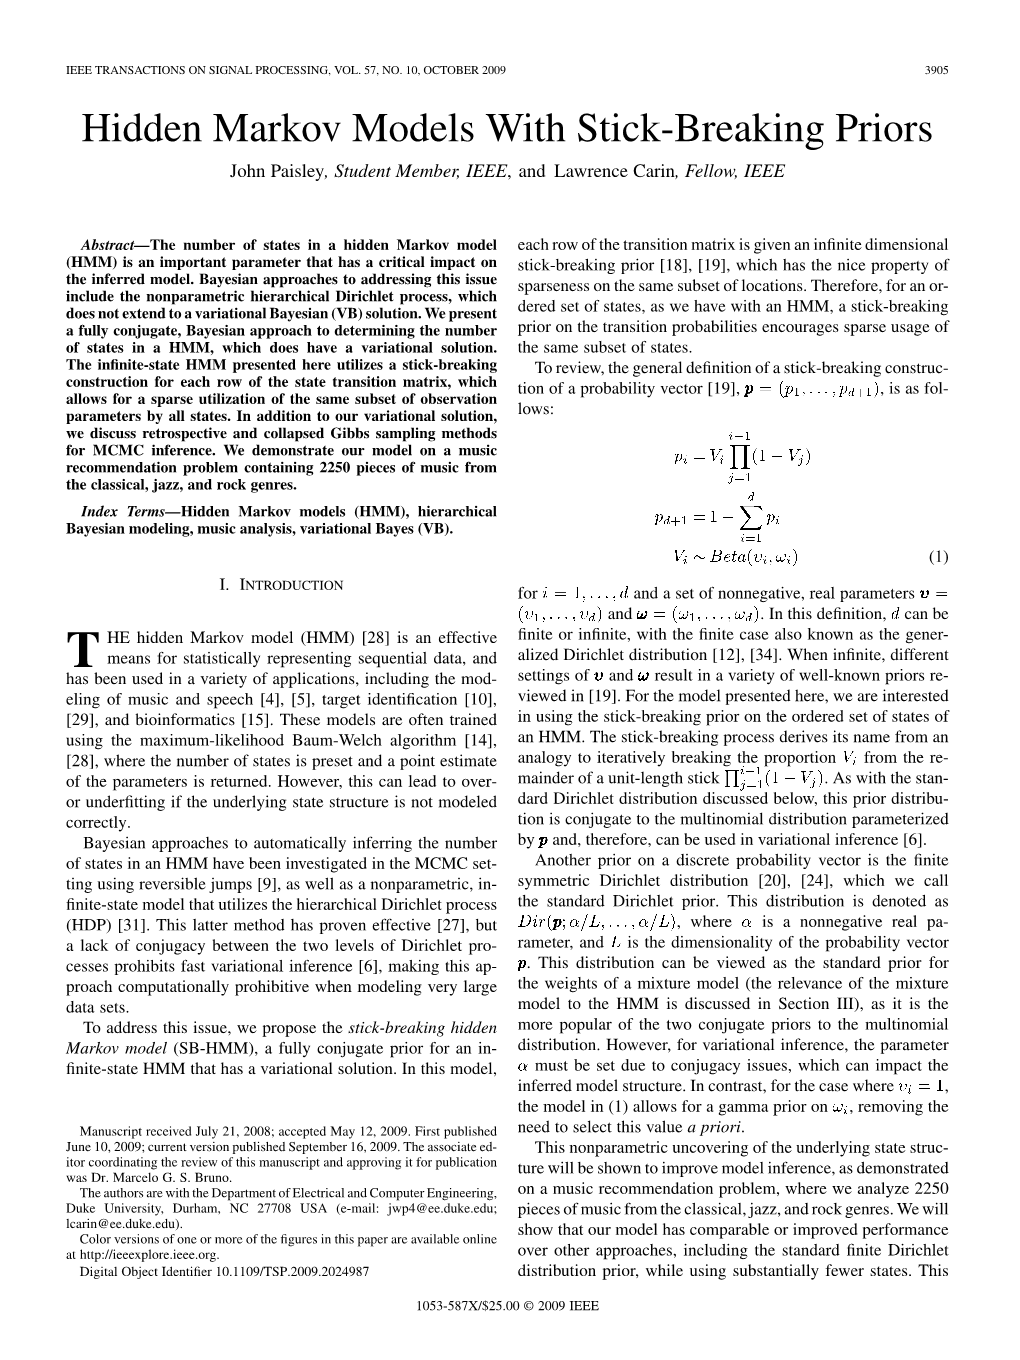 Hidden Markov Models with Stick-Breaking Priors John Paisley, Student Member, IEEE, and Lawrence Carin, Fellow, IEEE